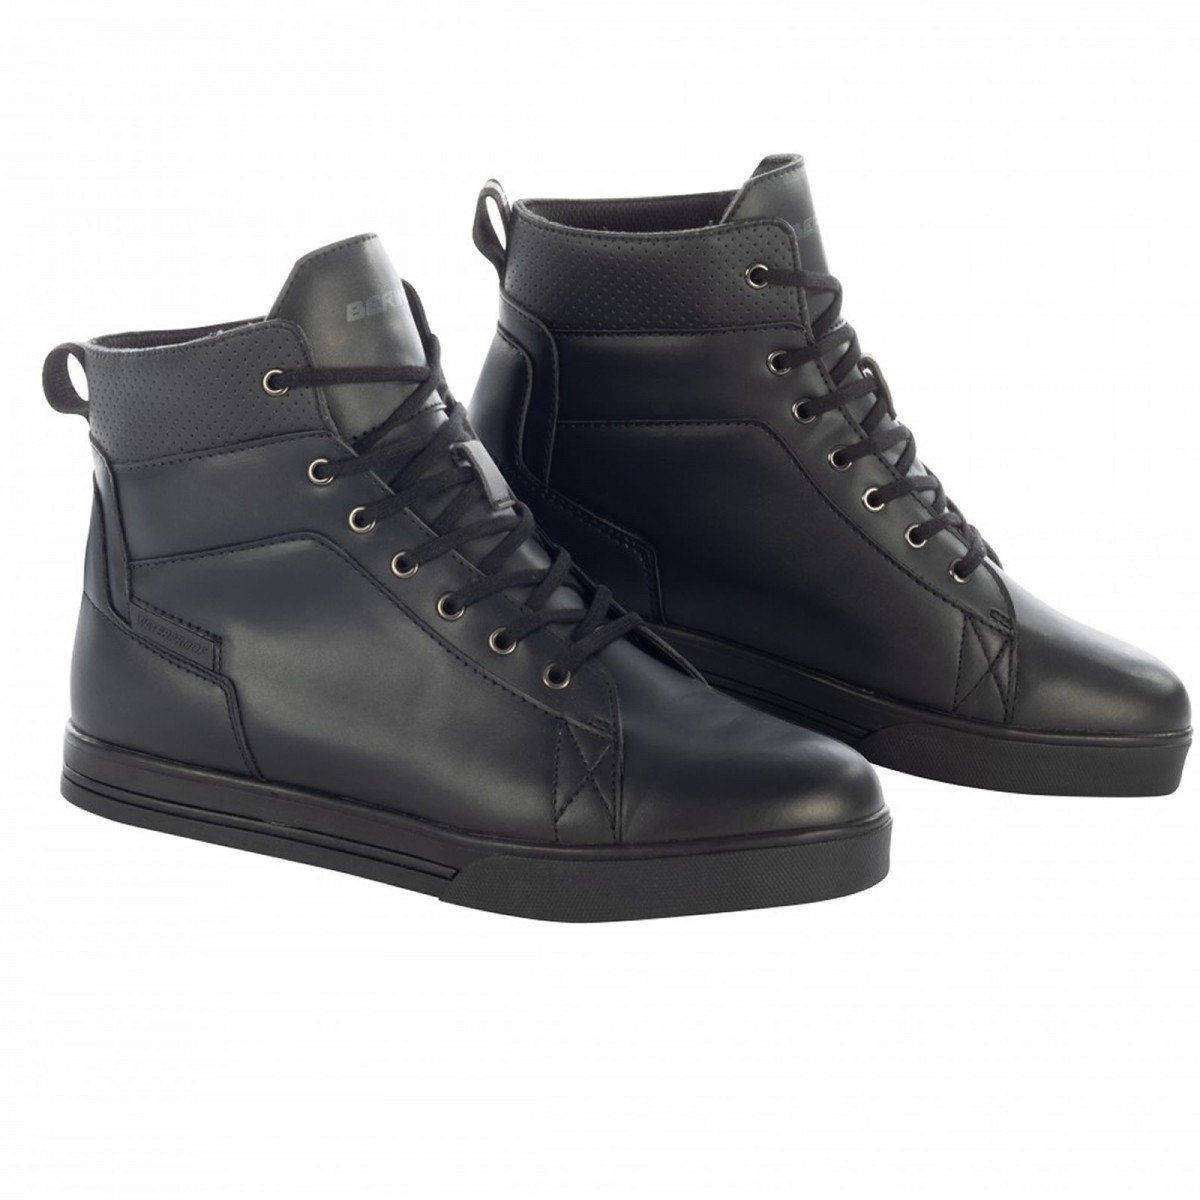 Image of Bering Indy Noir Chaussures Taille 45